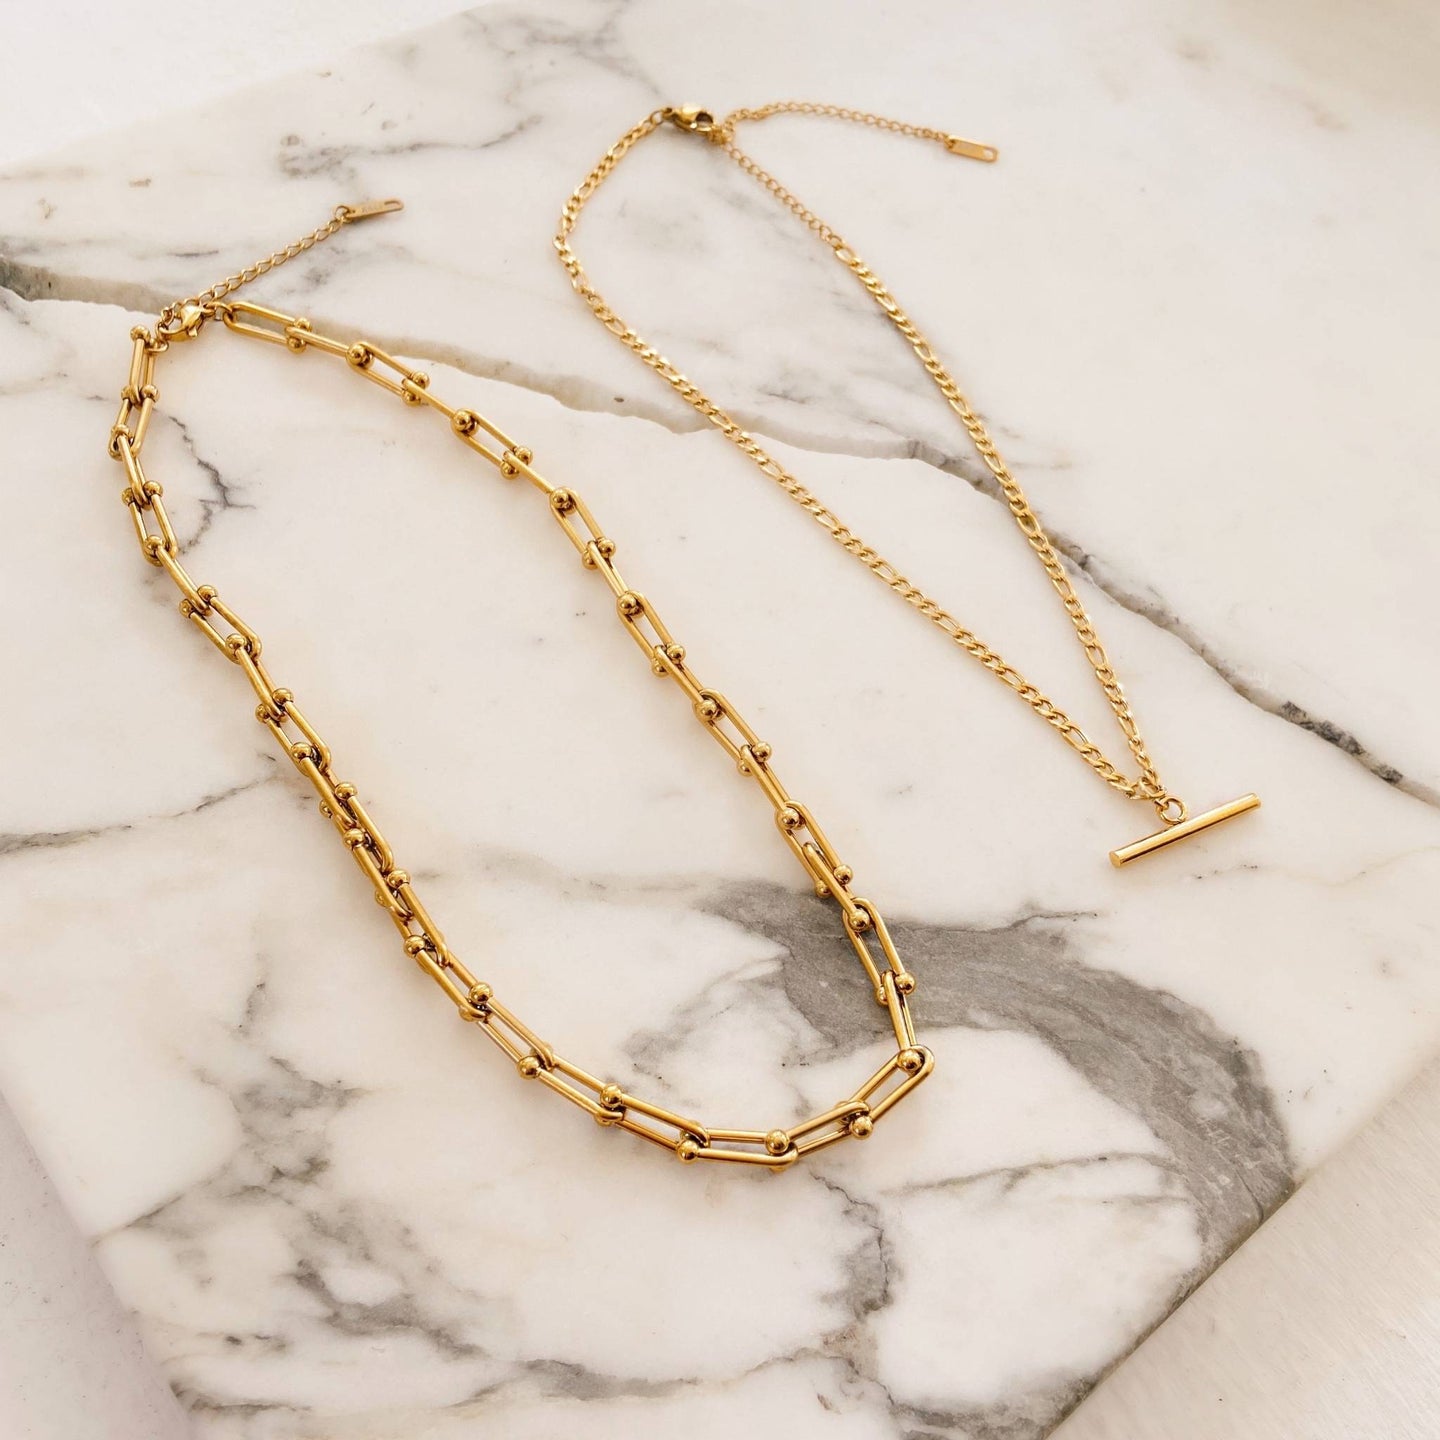 chunky layered necklaces in gold